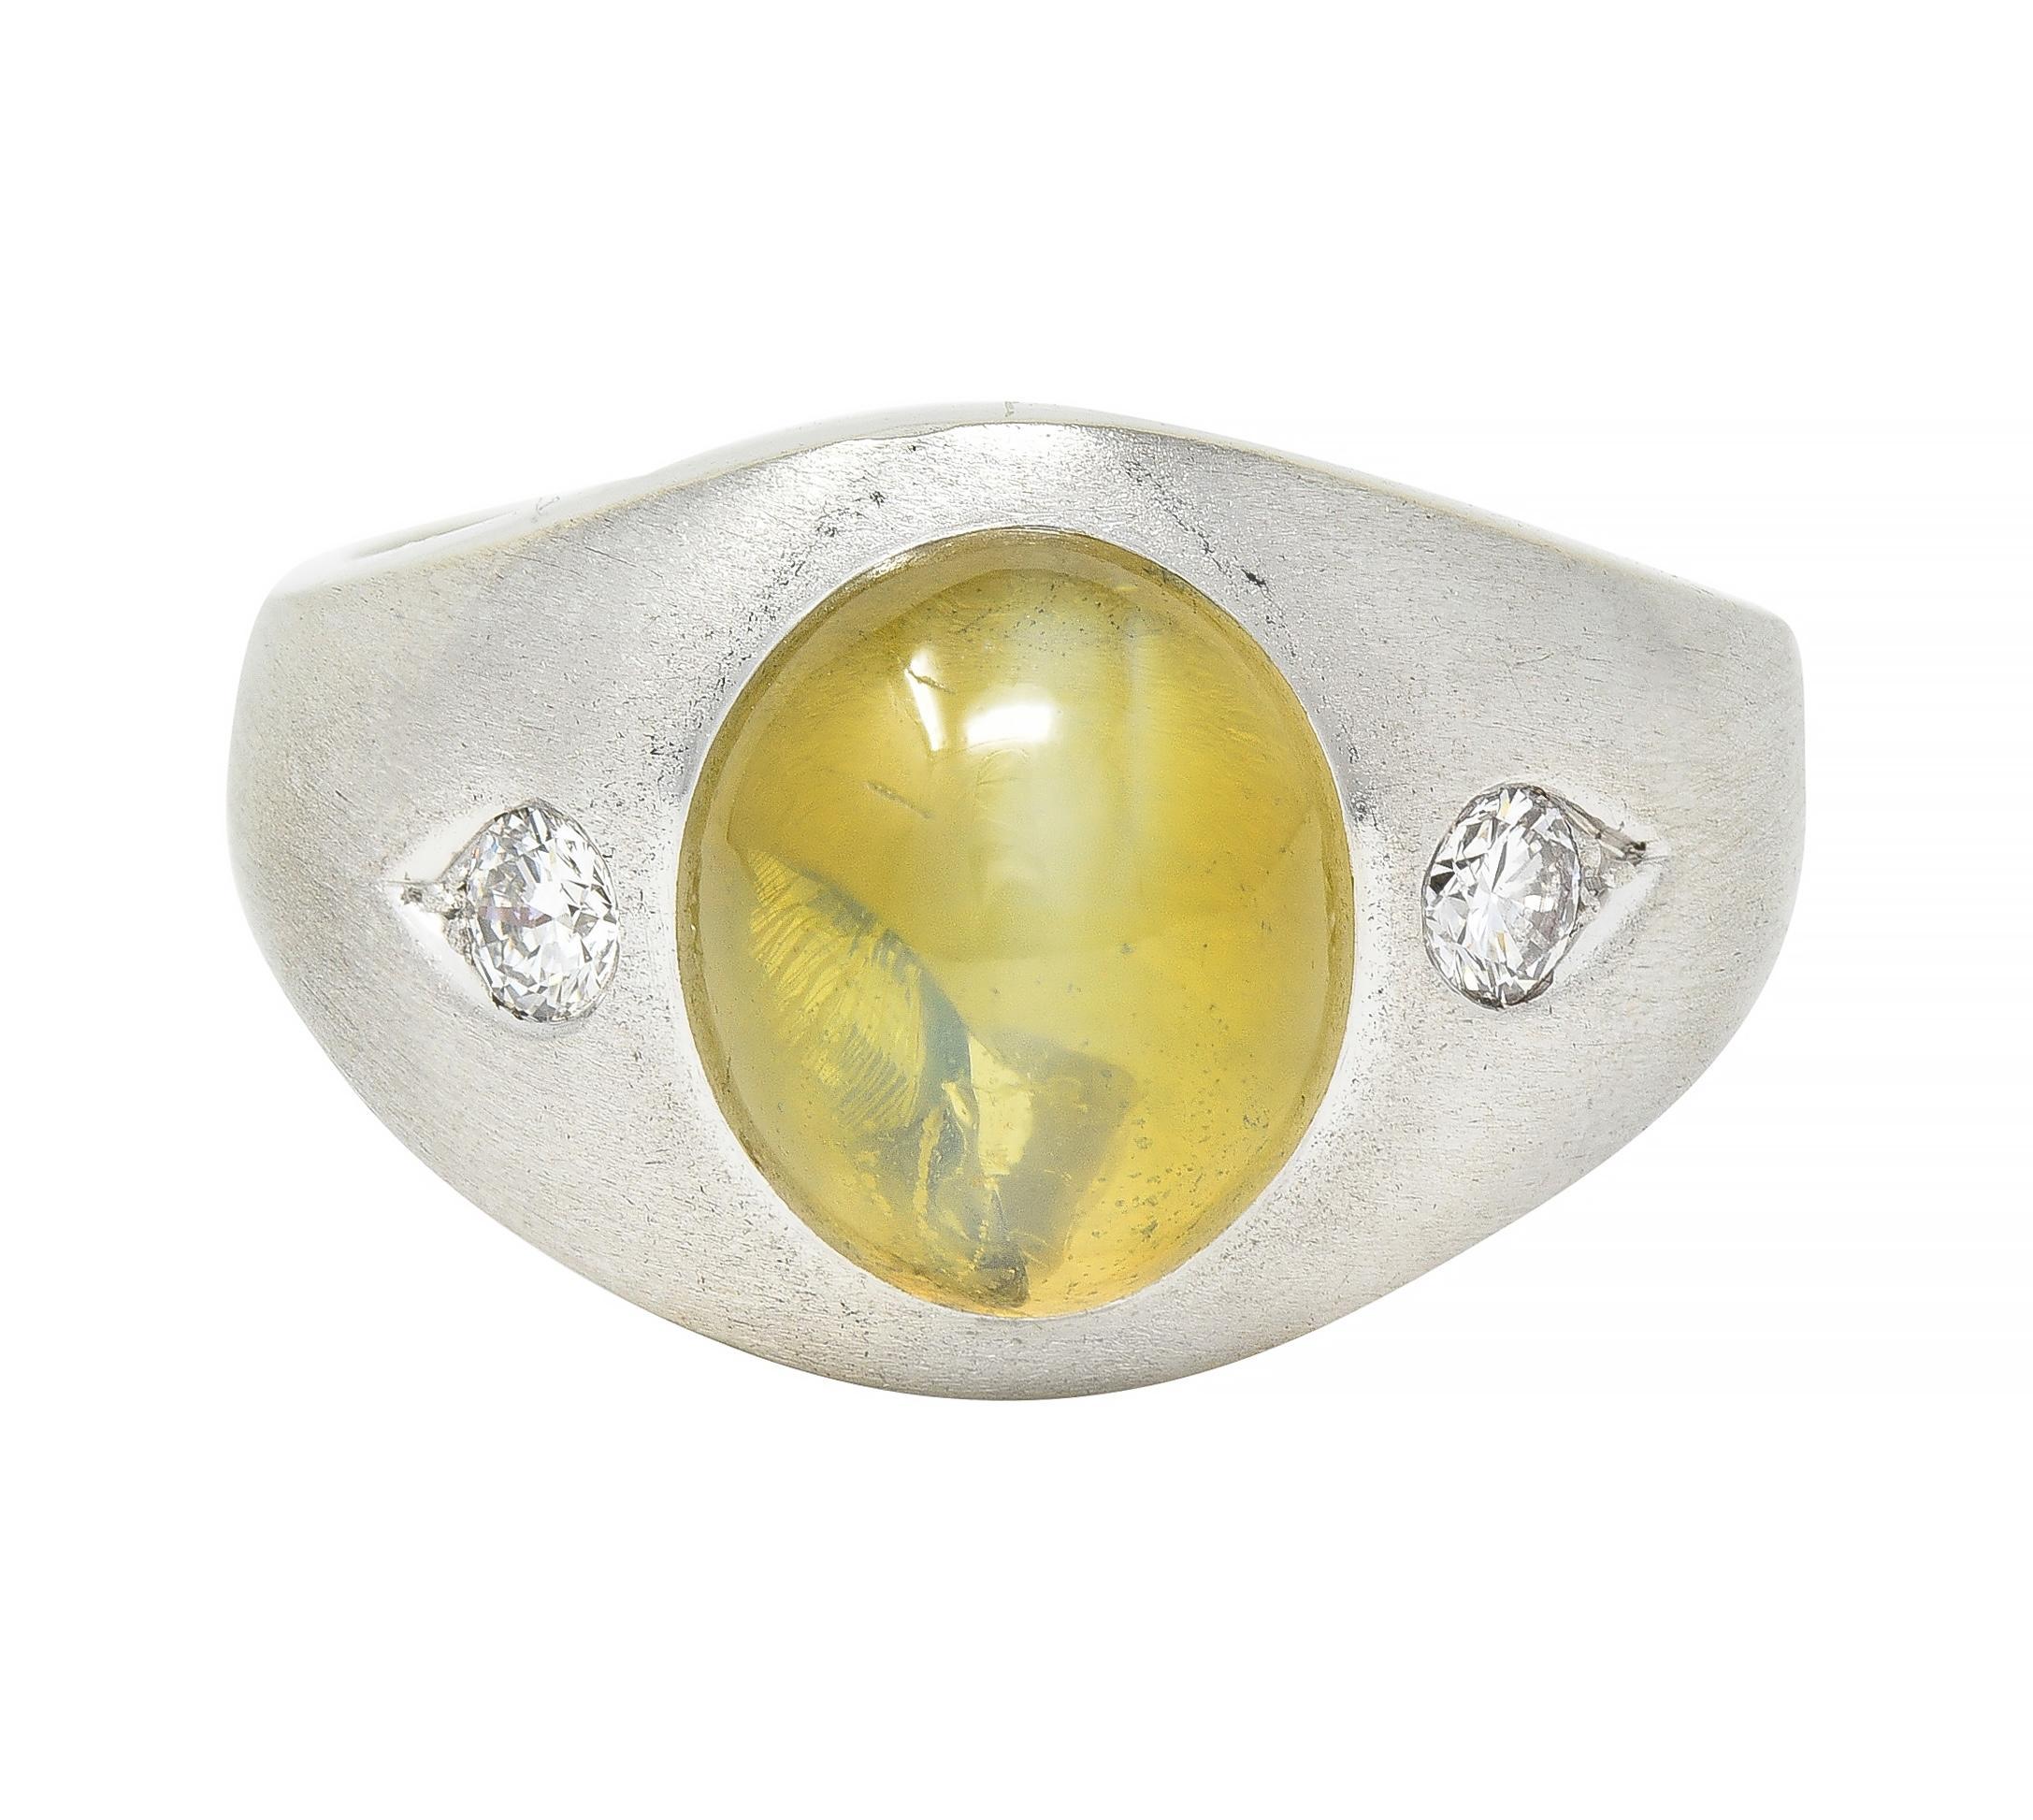 Centering an oval shaped cats eye chrysoberyl measuring 10.9 x 9.3 mm 
Translucent yellowish green displaying linear chatoyancy 
With milk and honey effect and natural mica inclusions 
Flush set in brushed matte gold bombay surround 
Flanked by